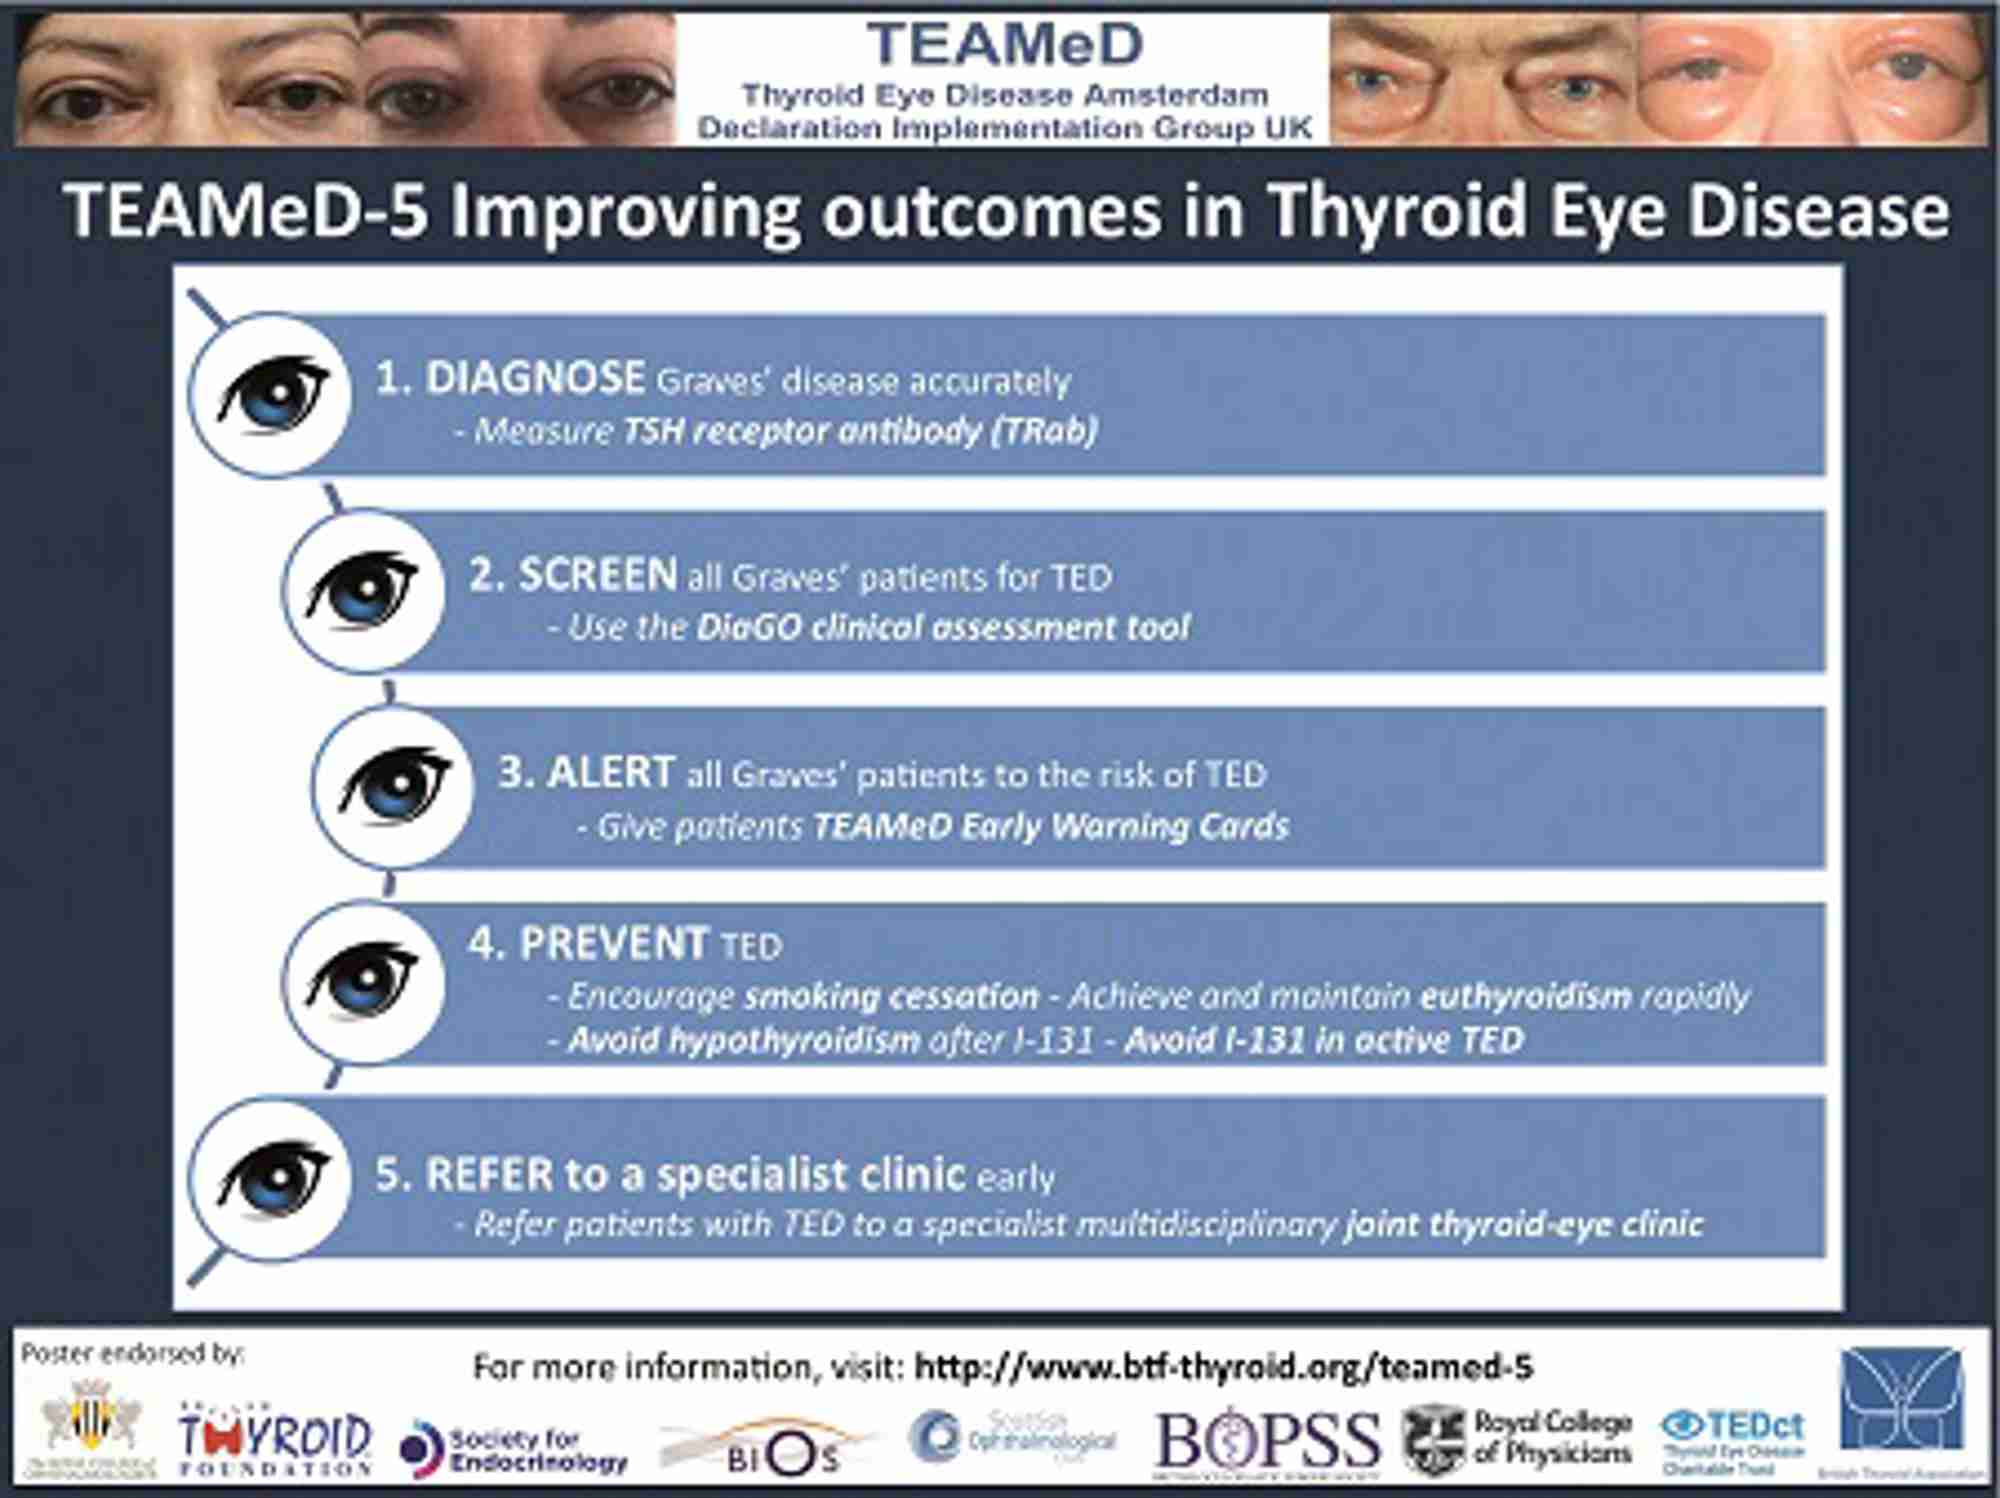 Figure 1. TEAMeD-5: five steps to improve outcomes in TED patients